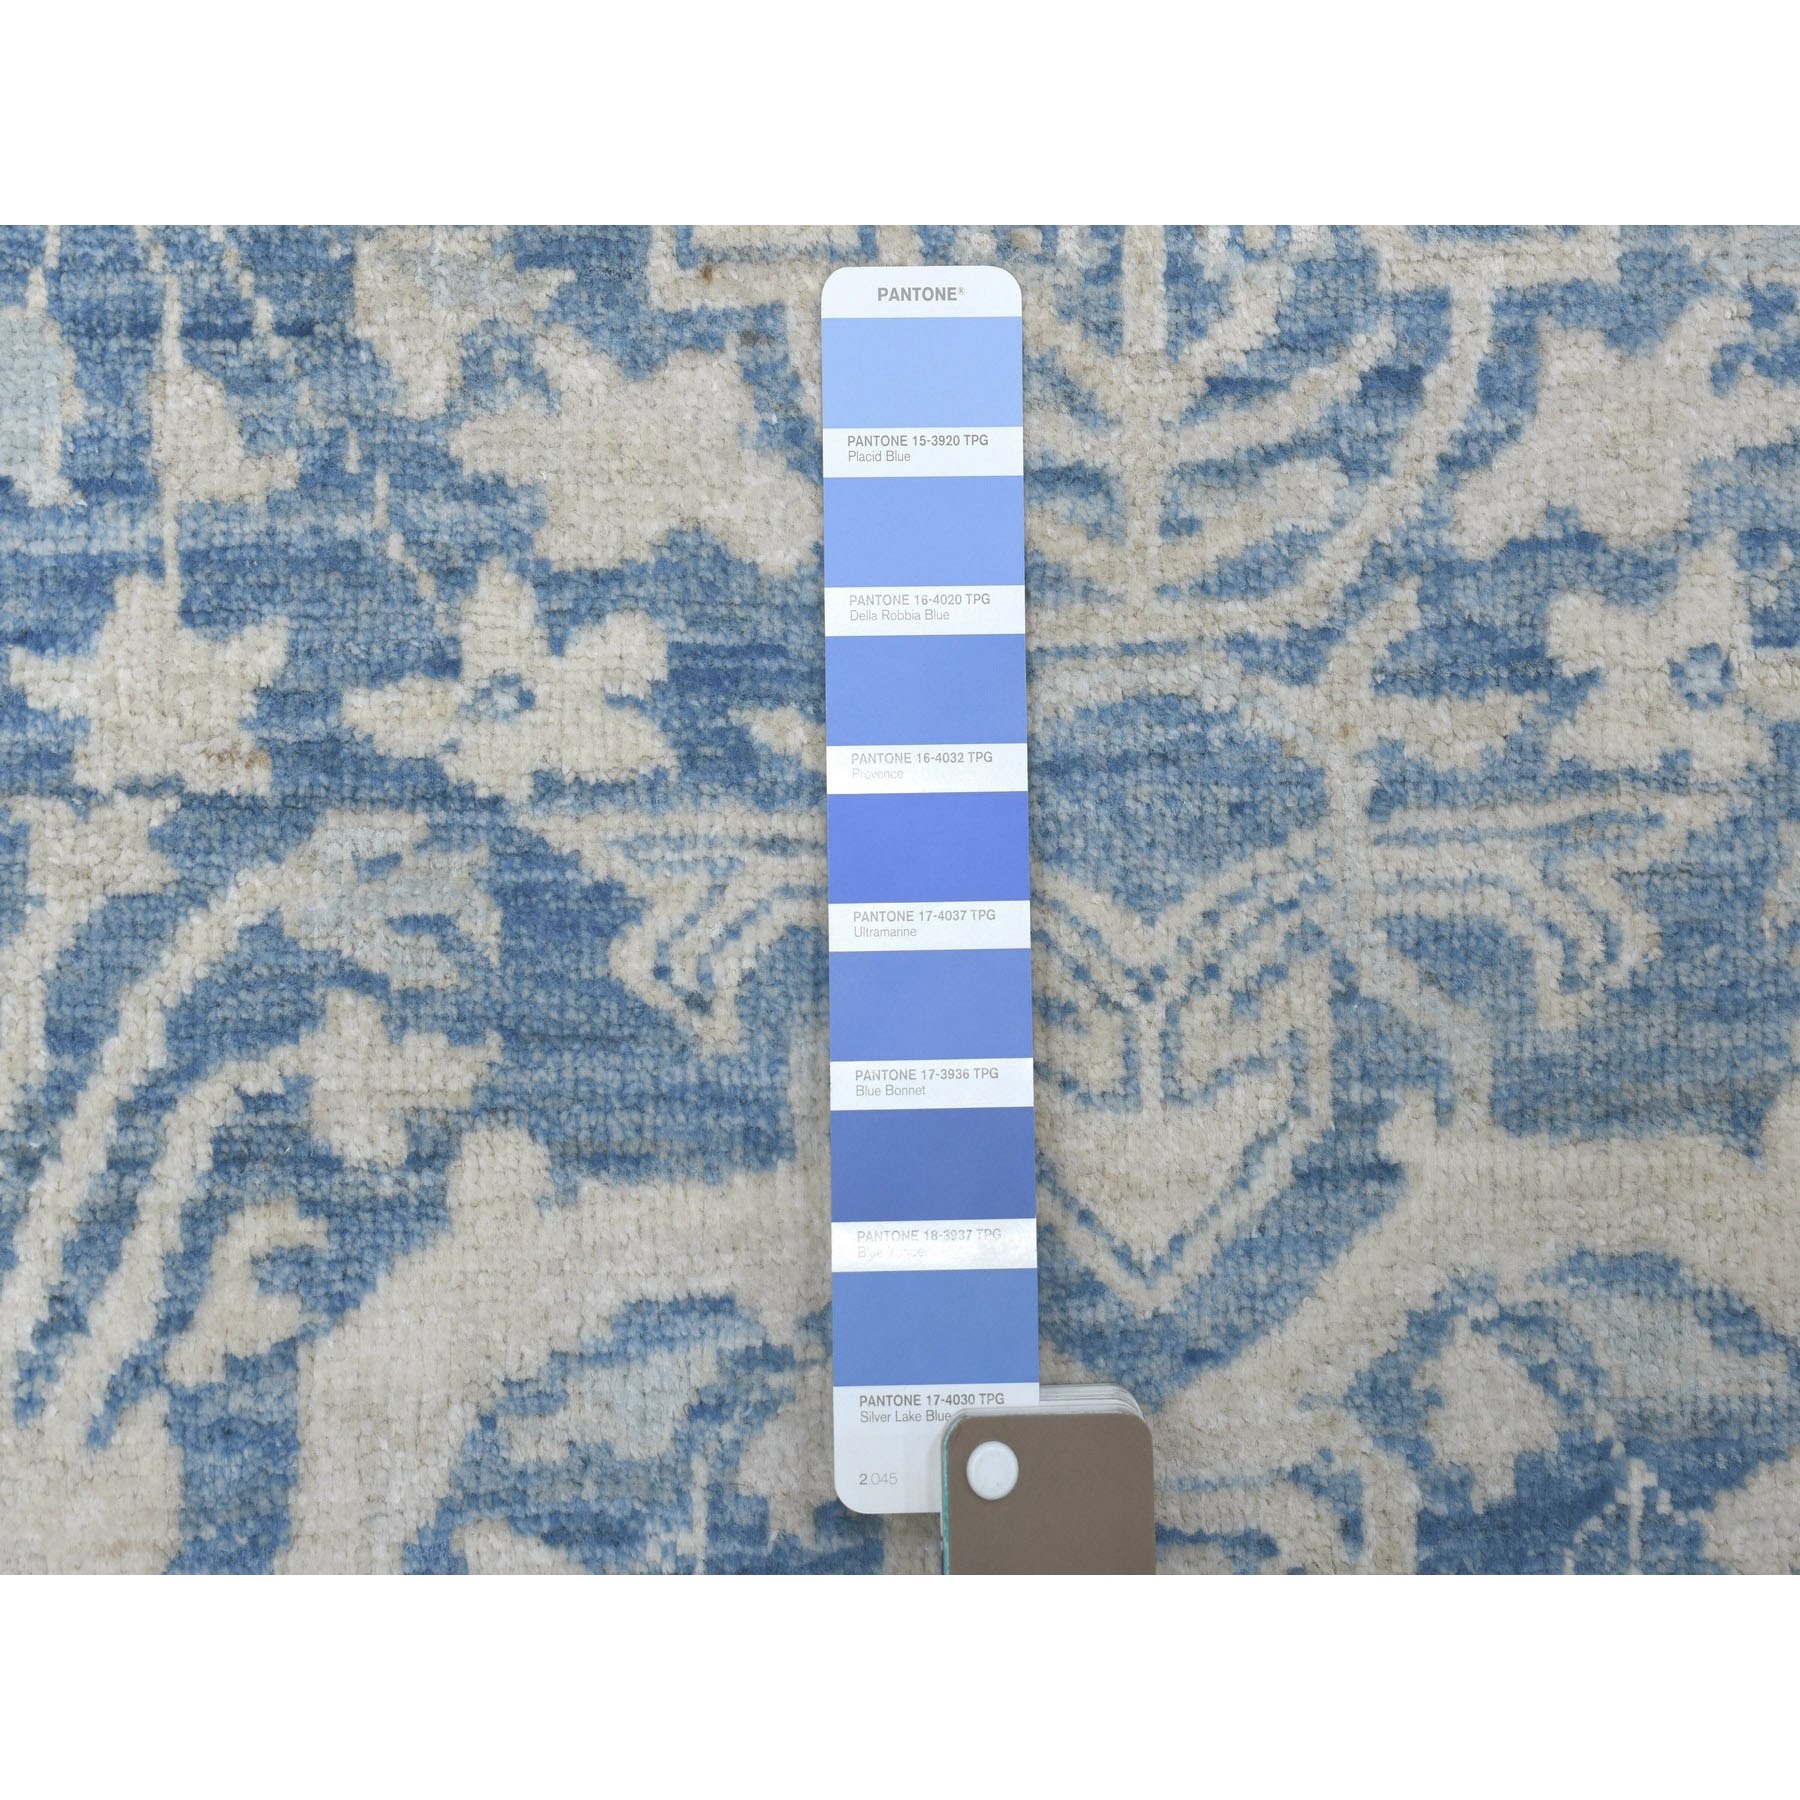 Agra And Turkish Collection Hand Knotted Blue 1135656 Rug